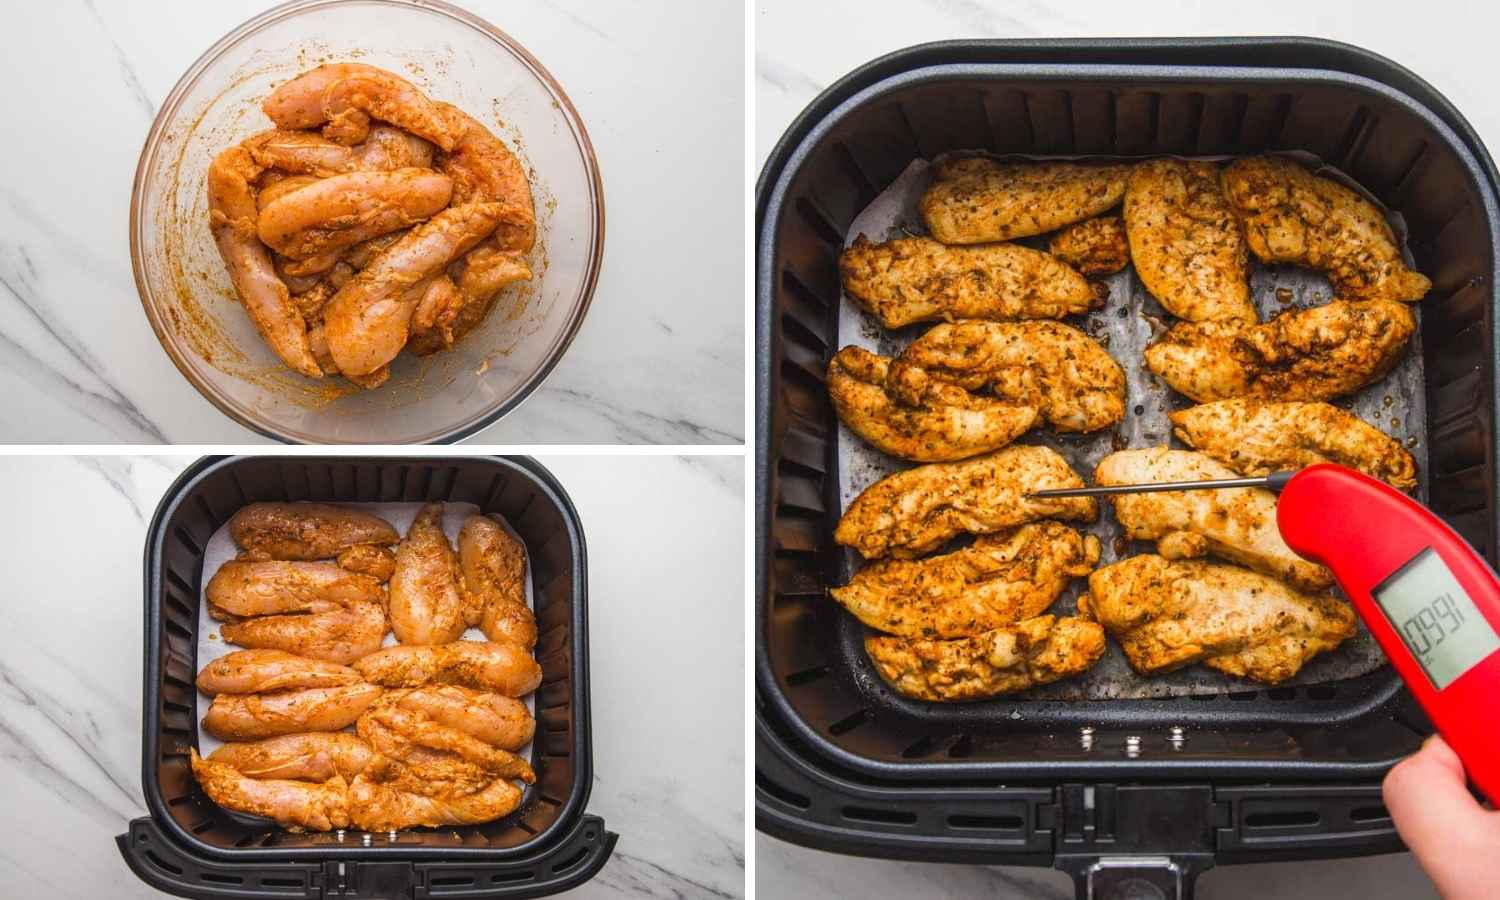 Collage of 3 images showing how to season and air fry chicken tenders with no breading, then check the doneness by checking the internal temperature with a kitchen thermometer.